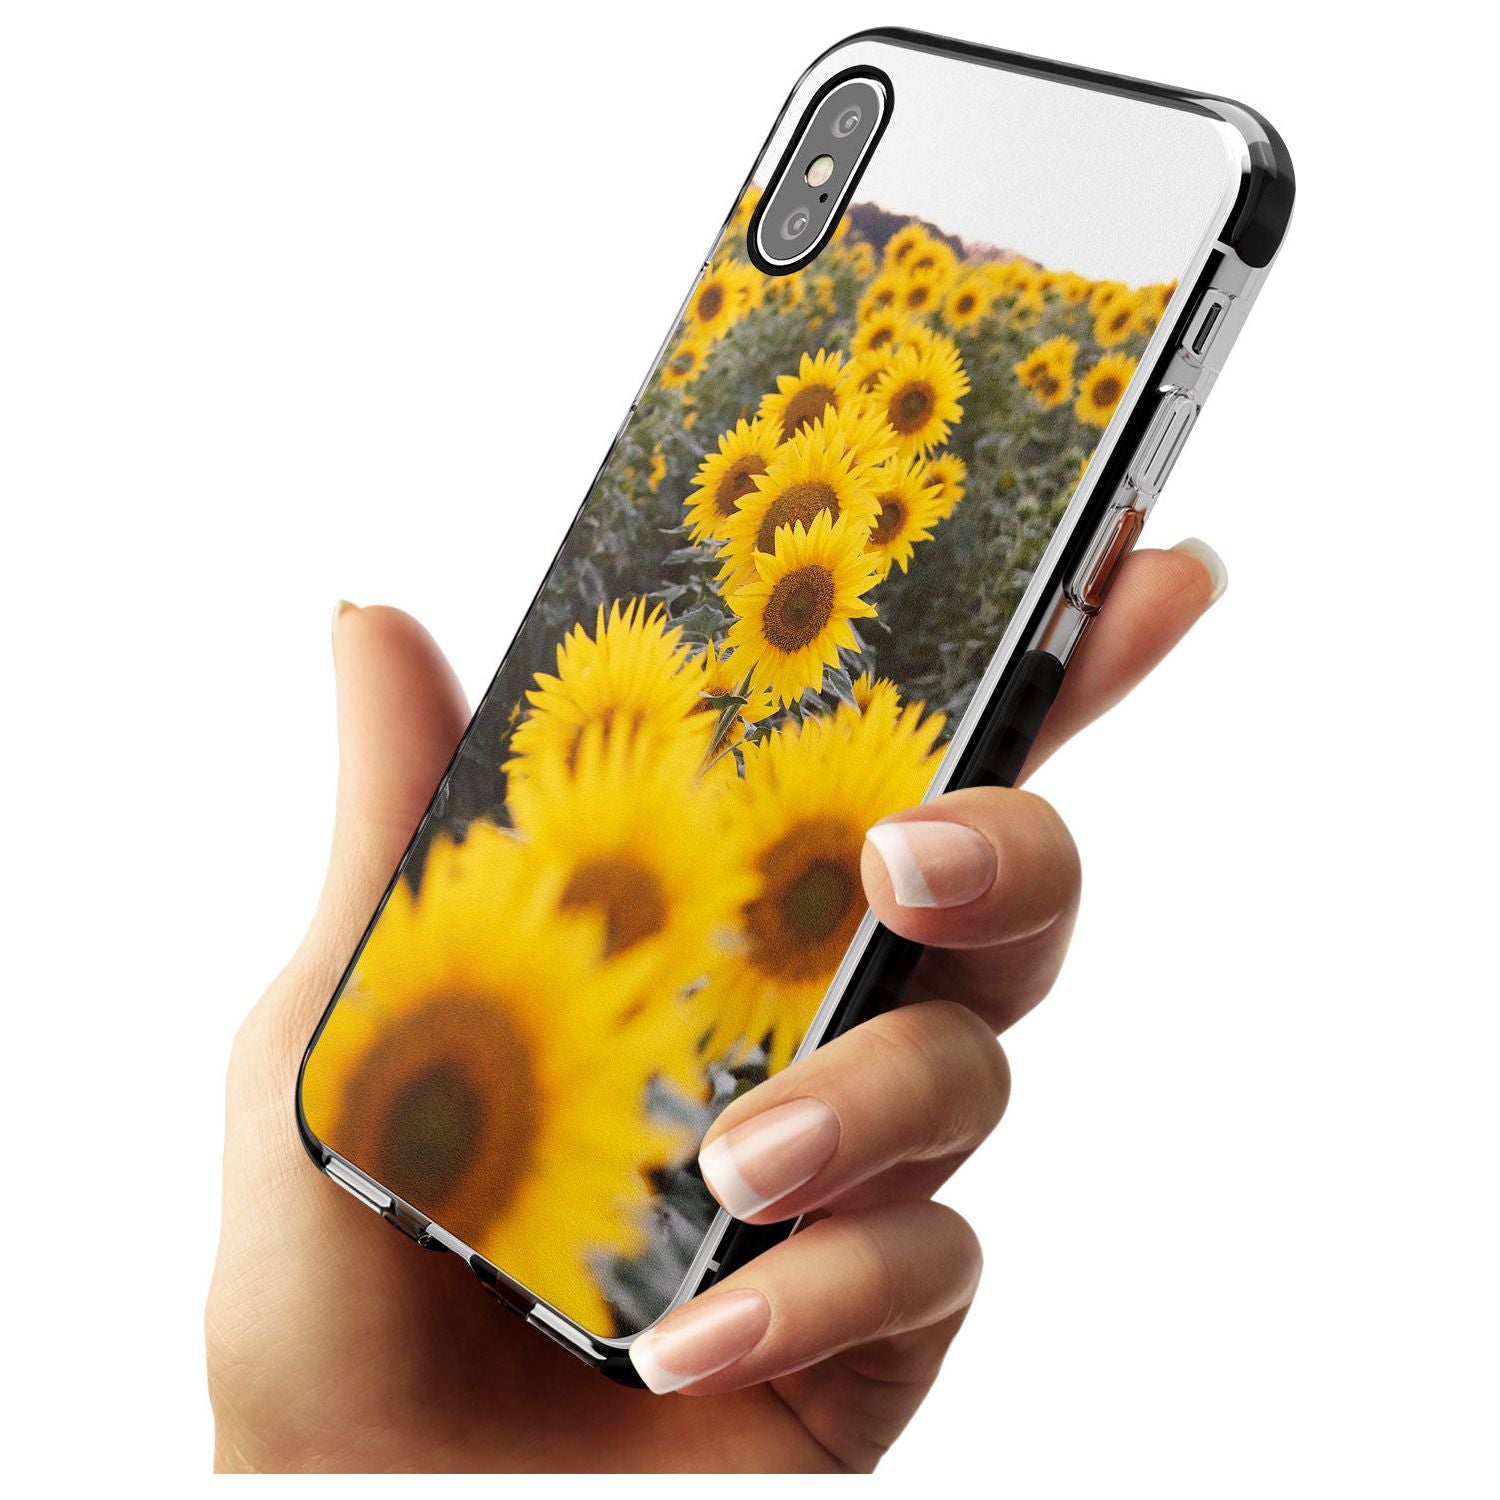 Sunflower Field Photograph Black Impact Phone Case for iPhone X XS Max XR